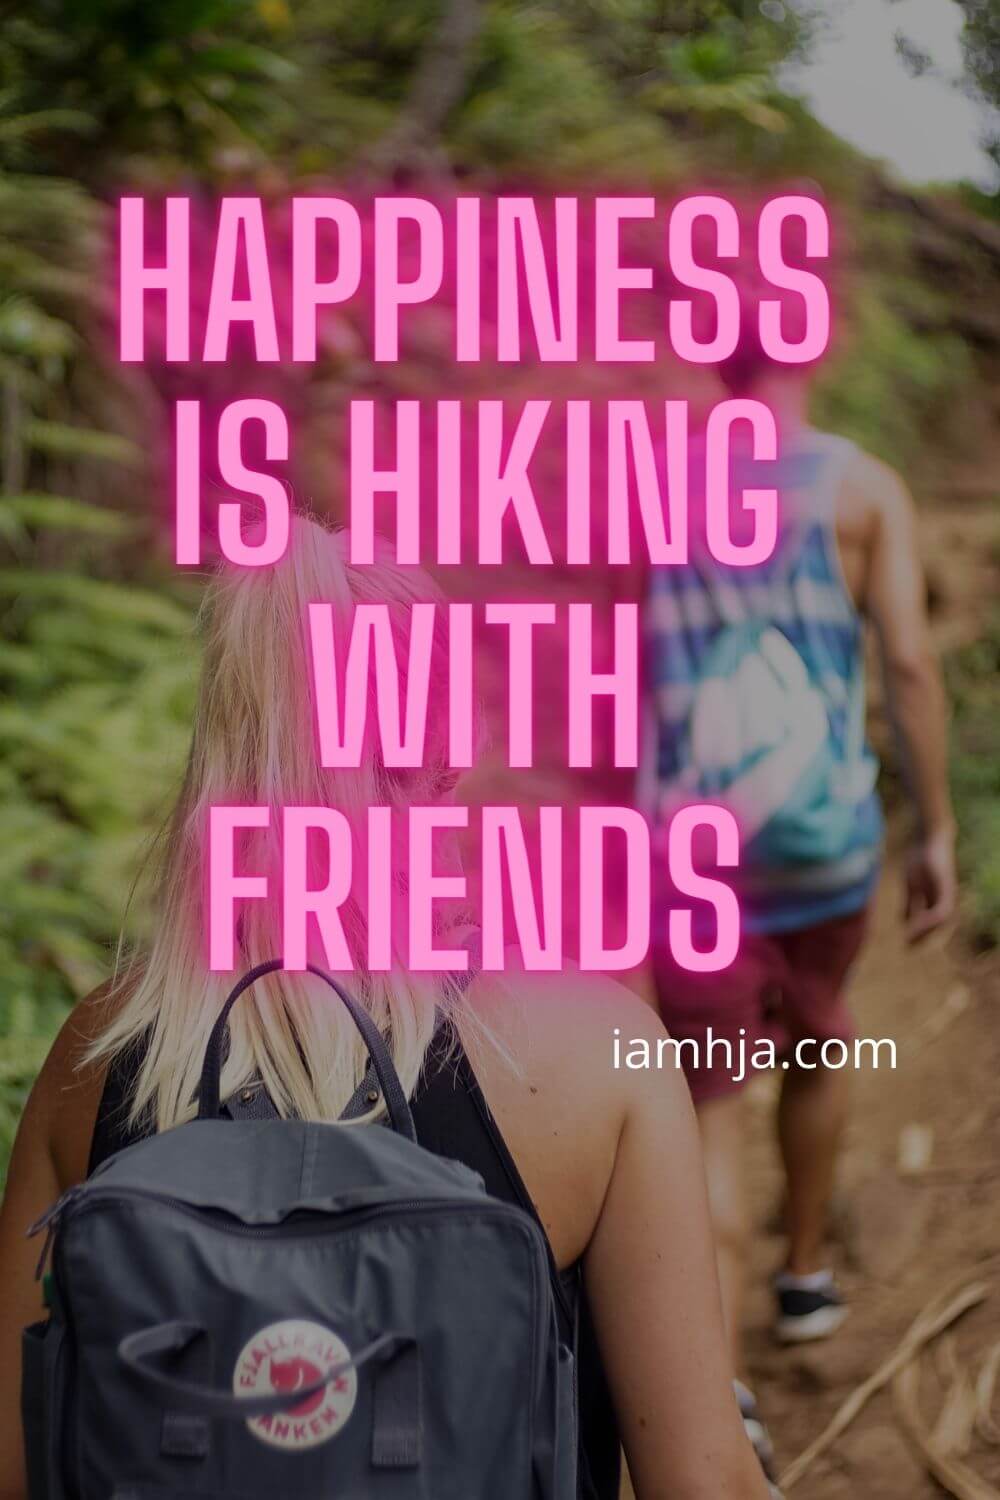 Happiness is hiking with friends.